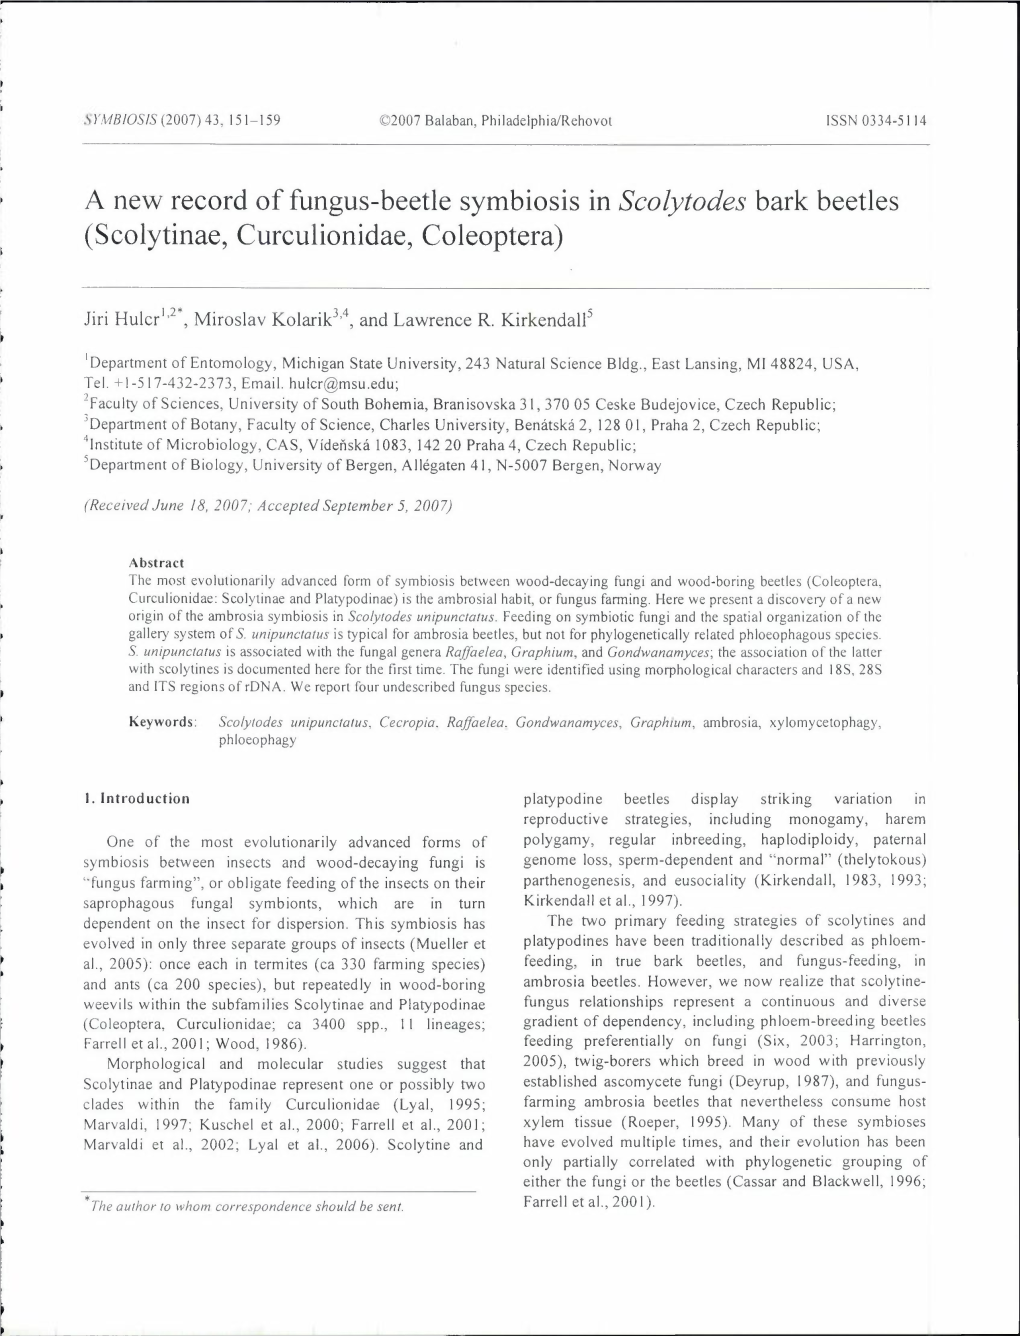 A New Record of Fungus-Beetle Symbiosis in Scolytodes Bark Beetles (Scolytinae, Curculionidae, Coleoptera)